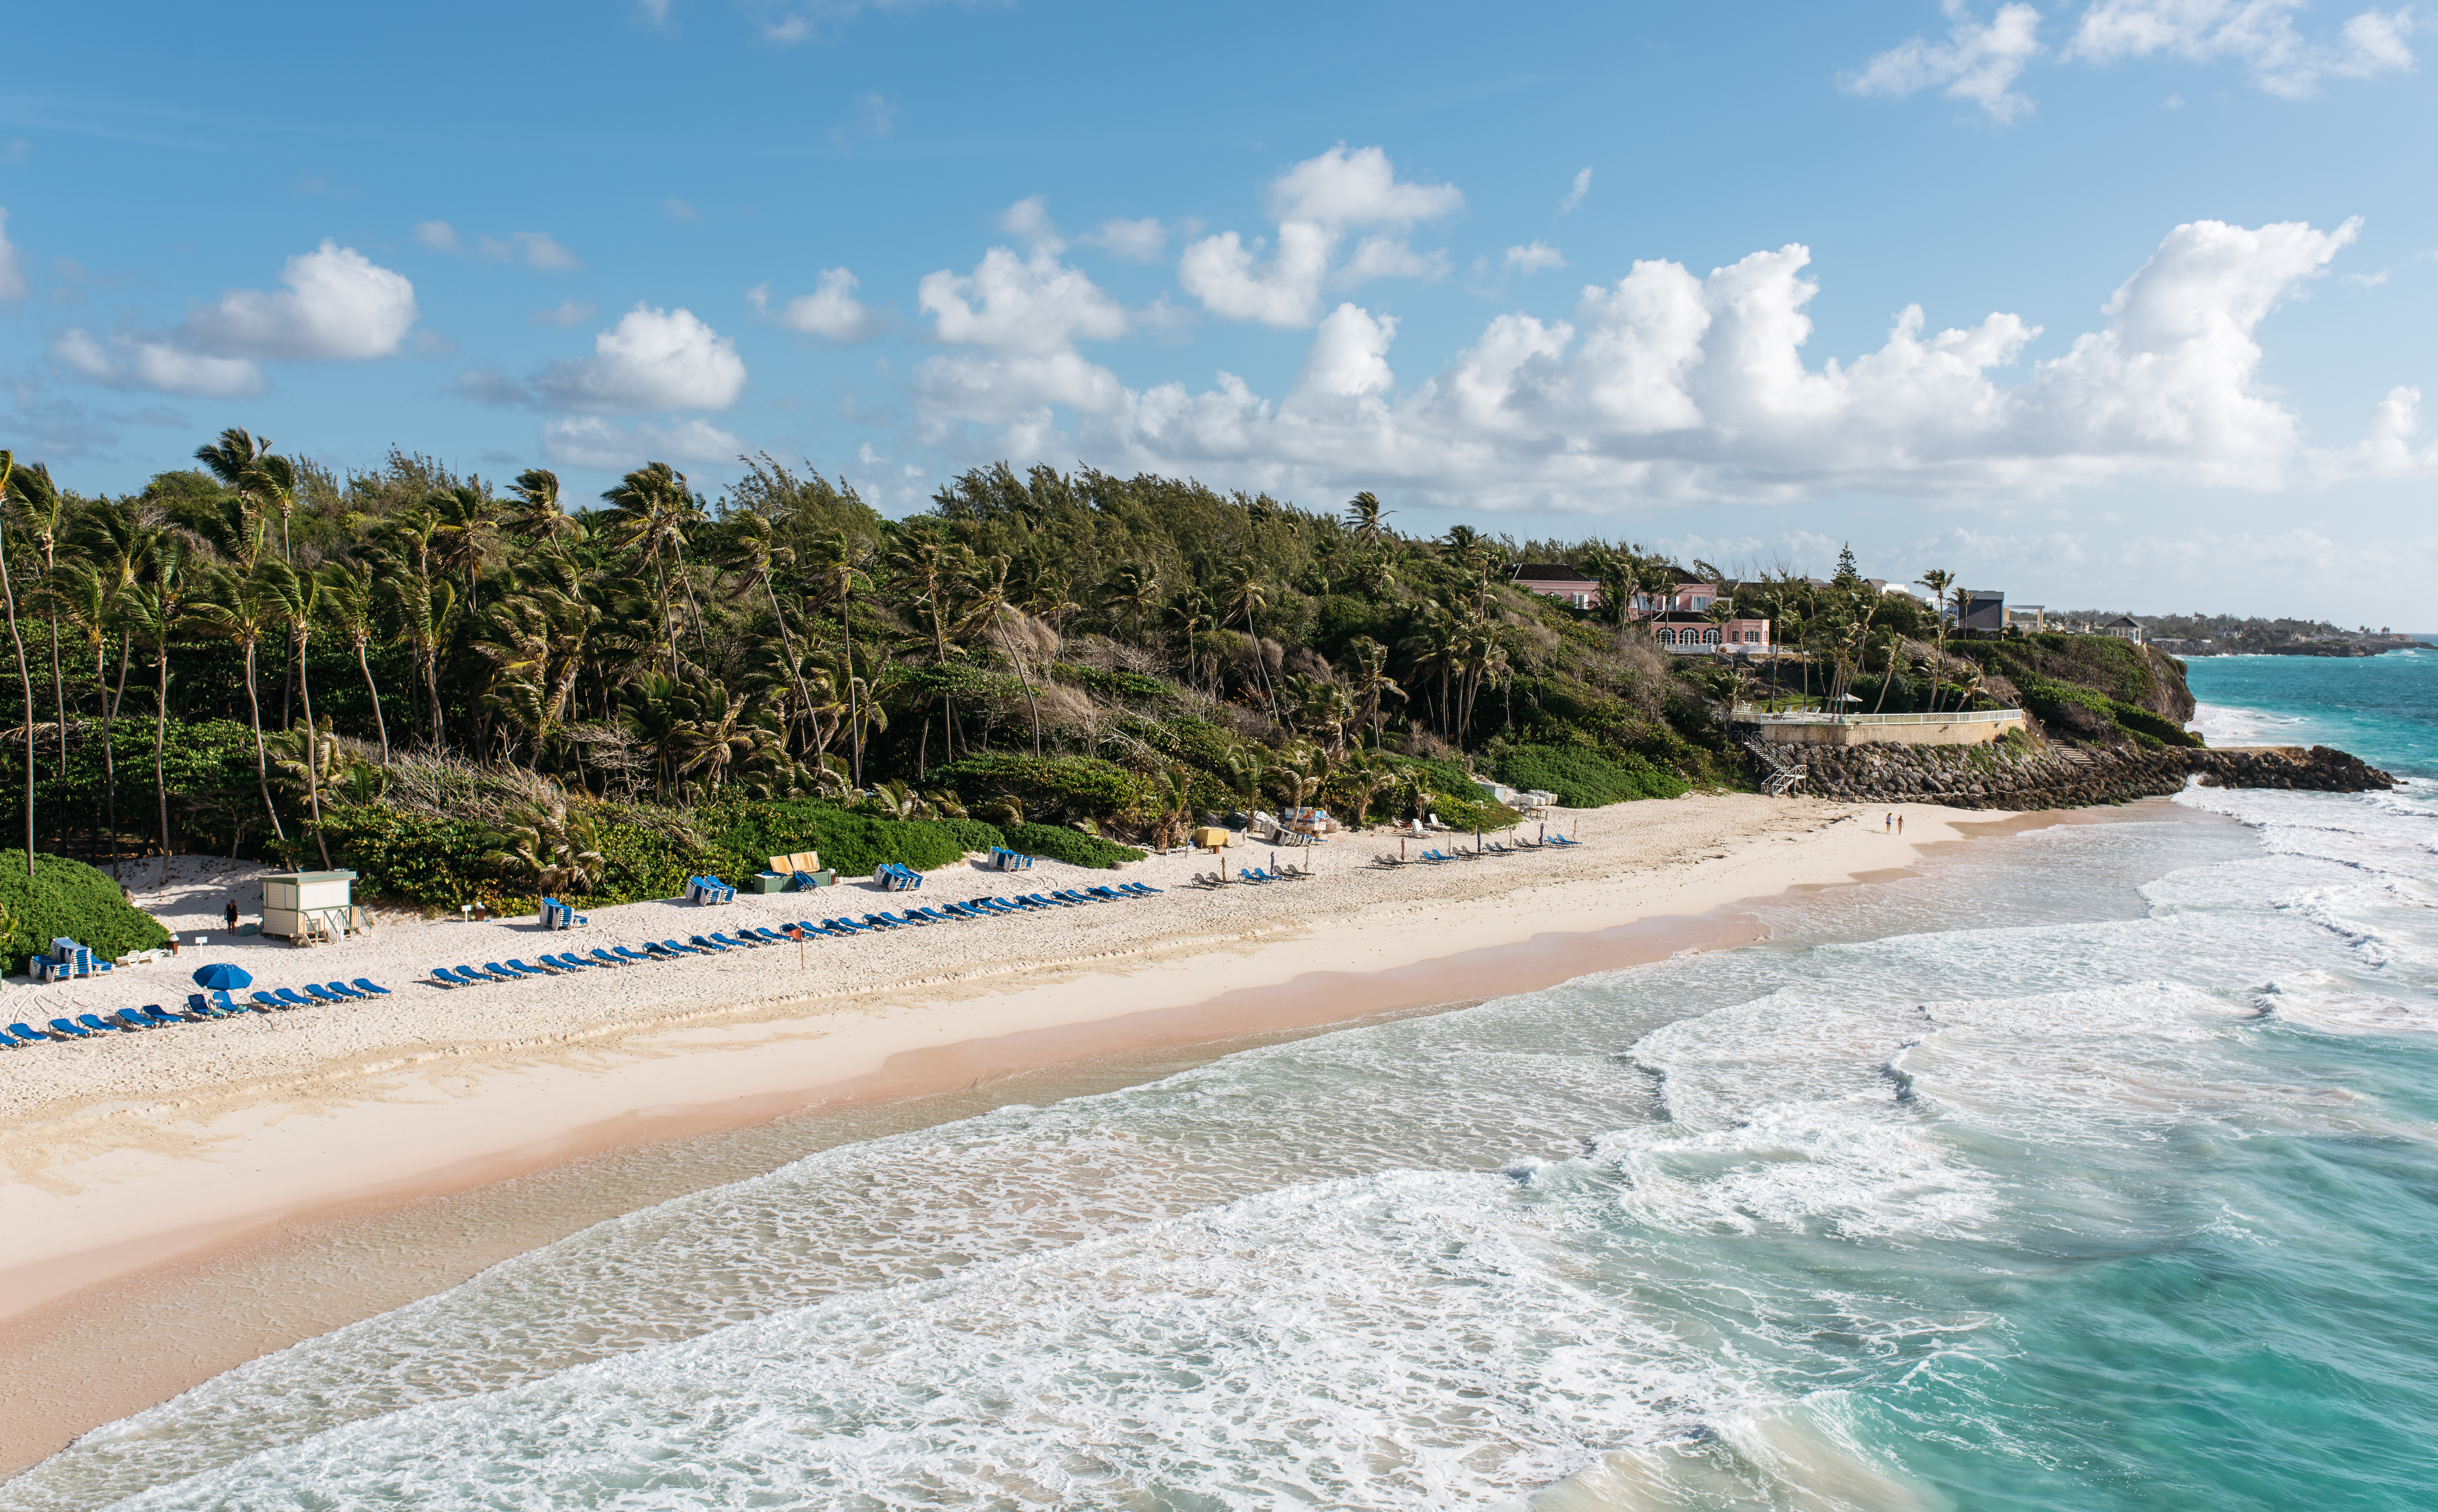 Wellness Travel 101 - How to Unwind the Right Way in Barbados